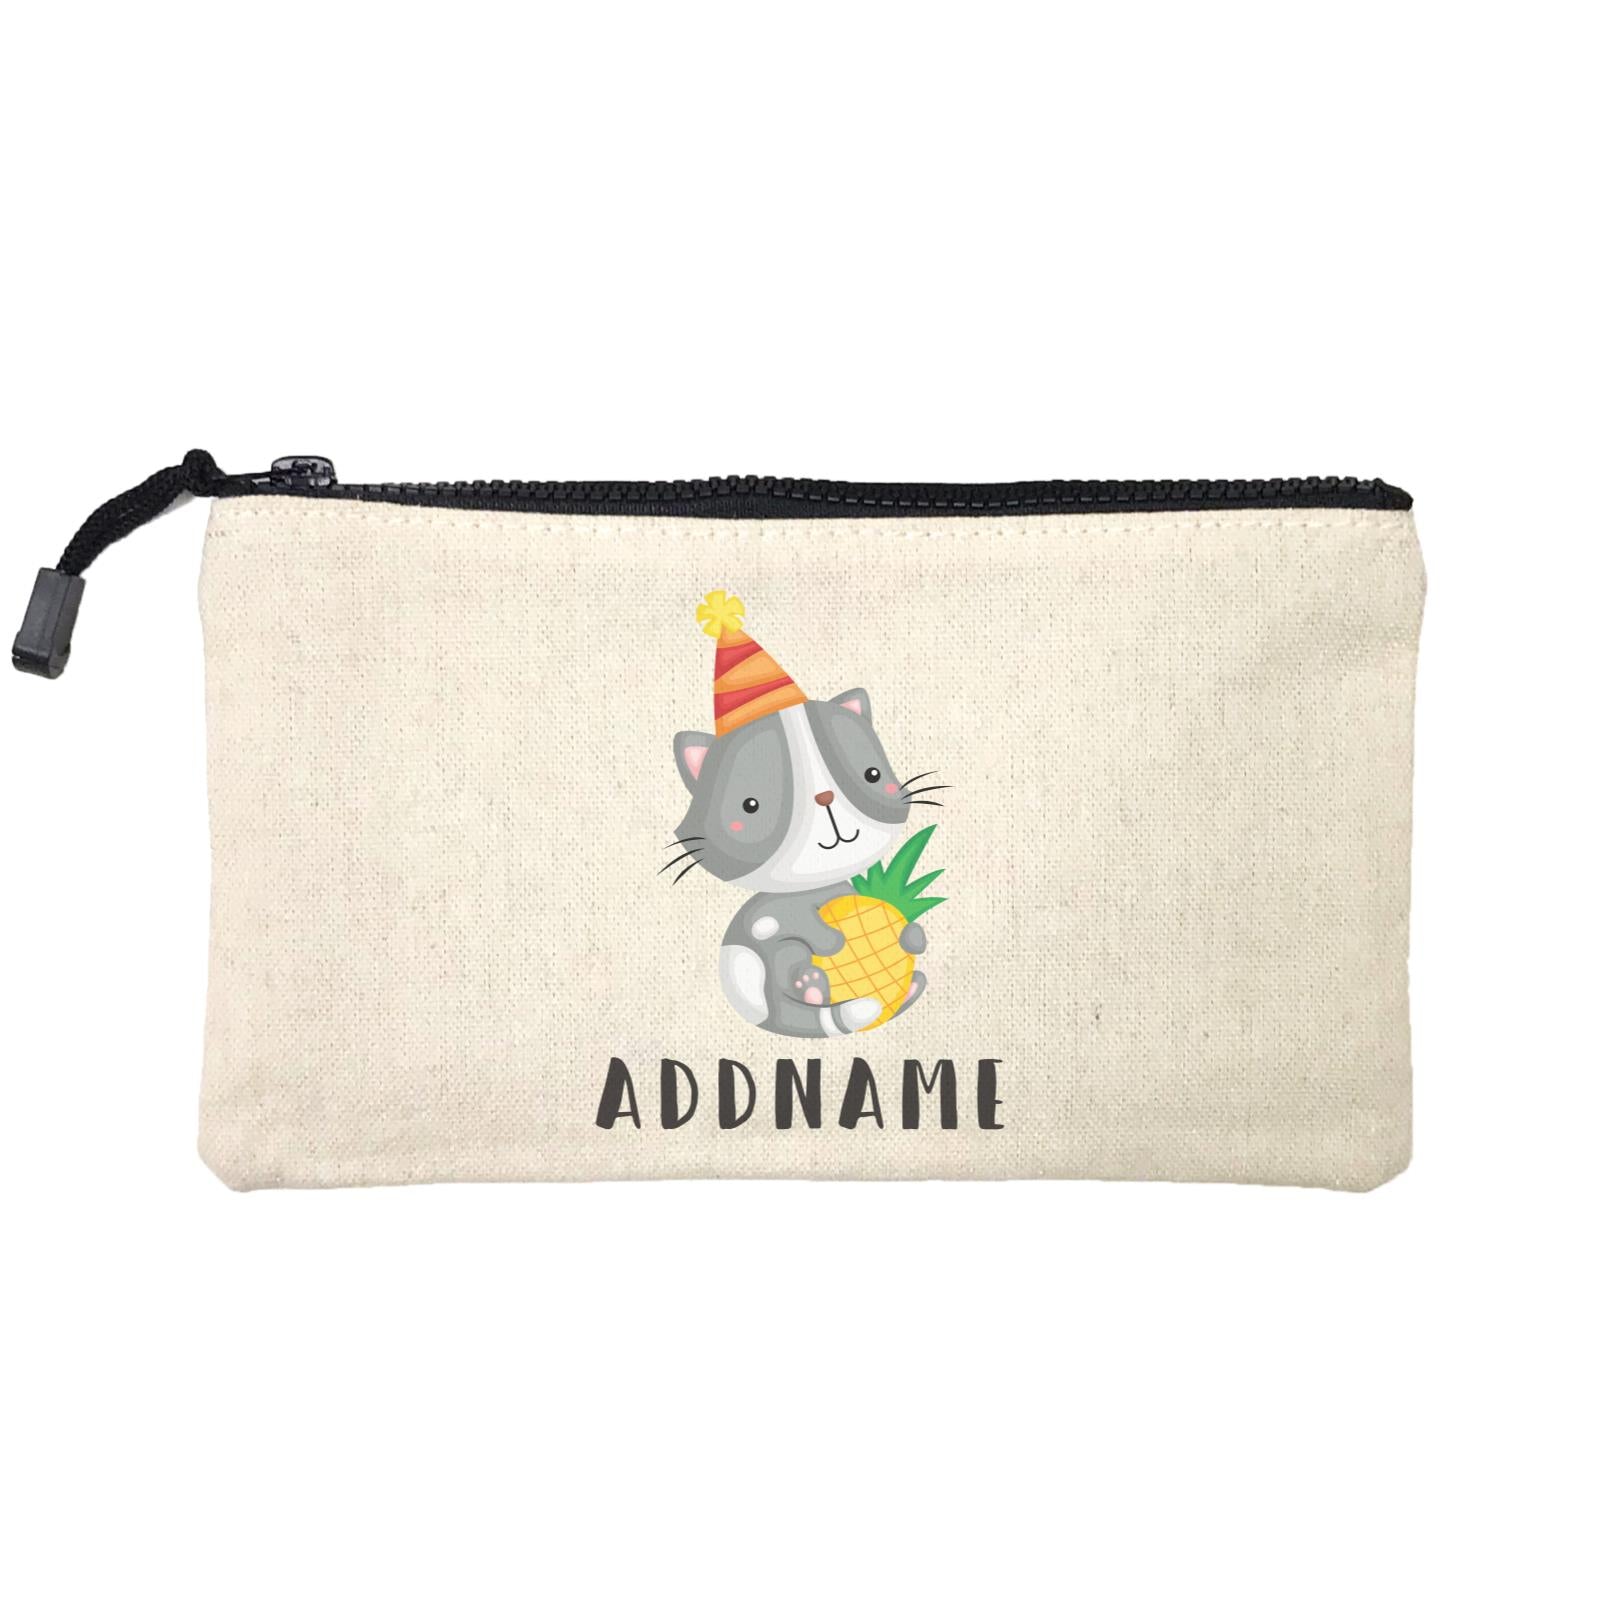 Birthday Hawaii Cute Cat Hugging Pineapple Addname Mini Accessories Stationery Pouch